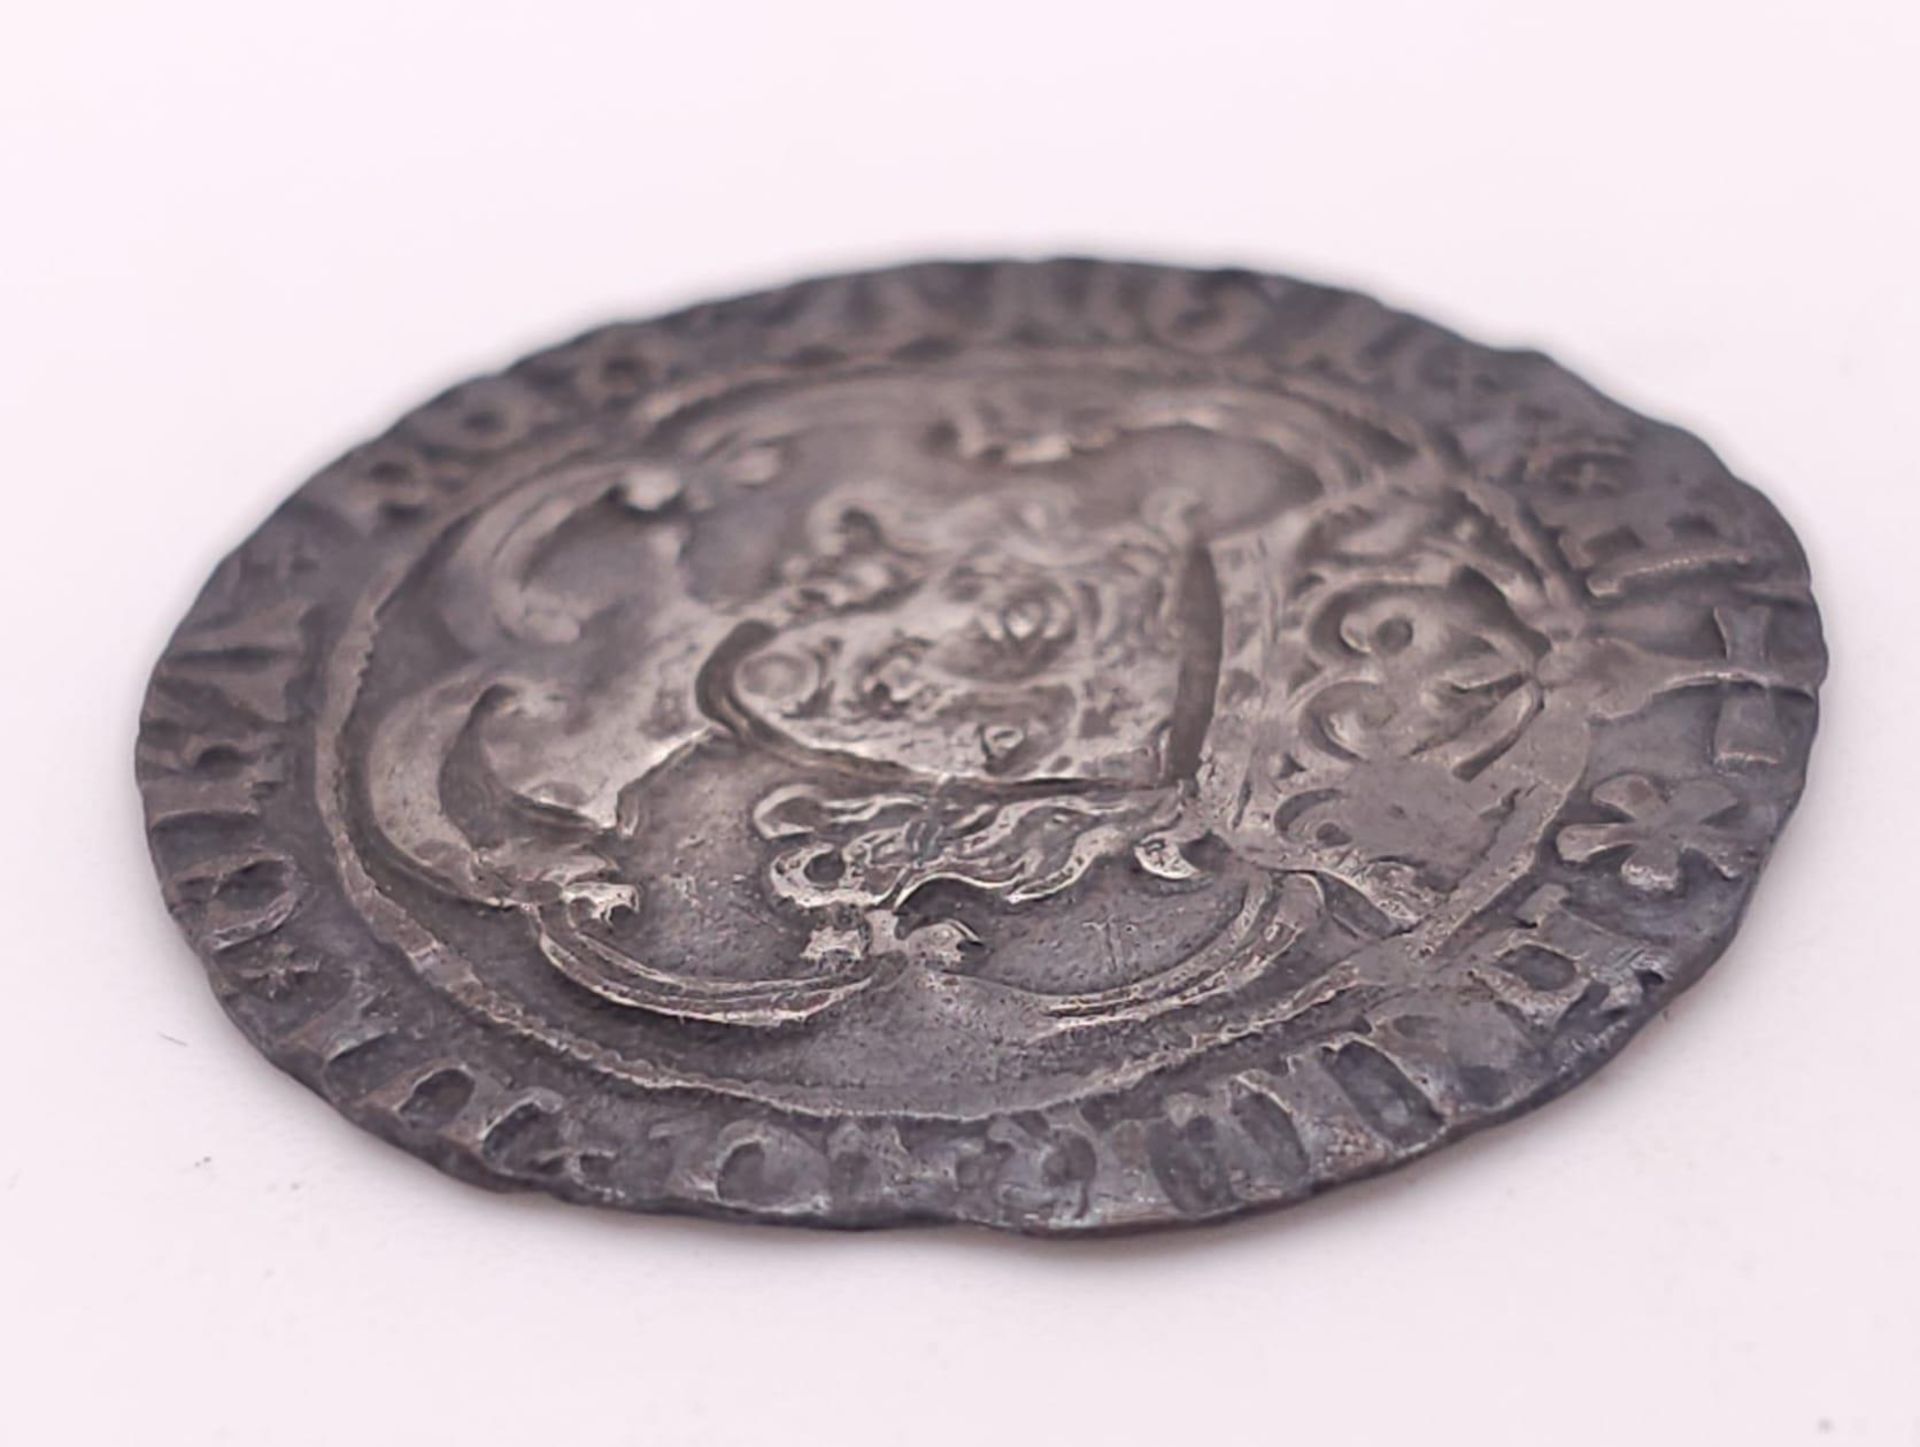 A Henry VII (1485-1603) Silver Groat Hammered Coin. Please see photos for conditions. S2199. - Image 7 of 8